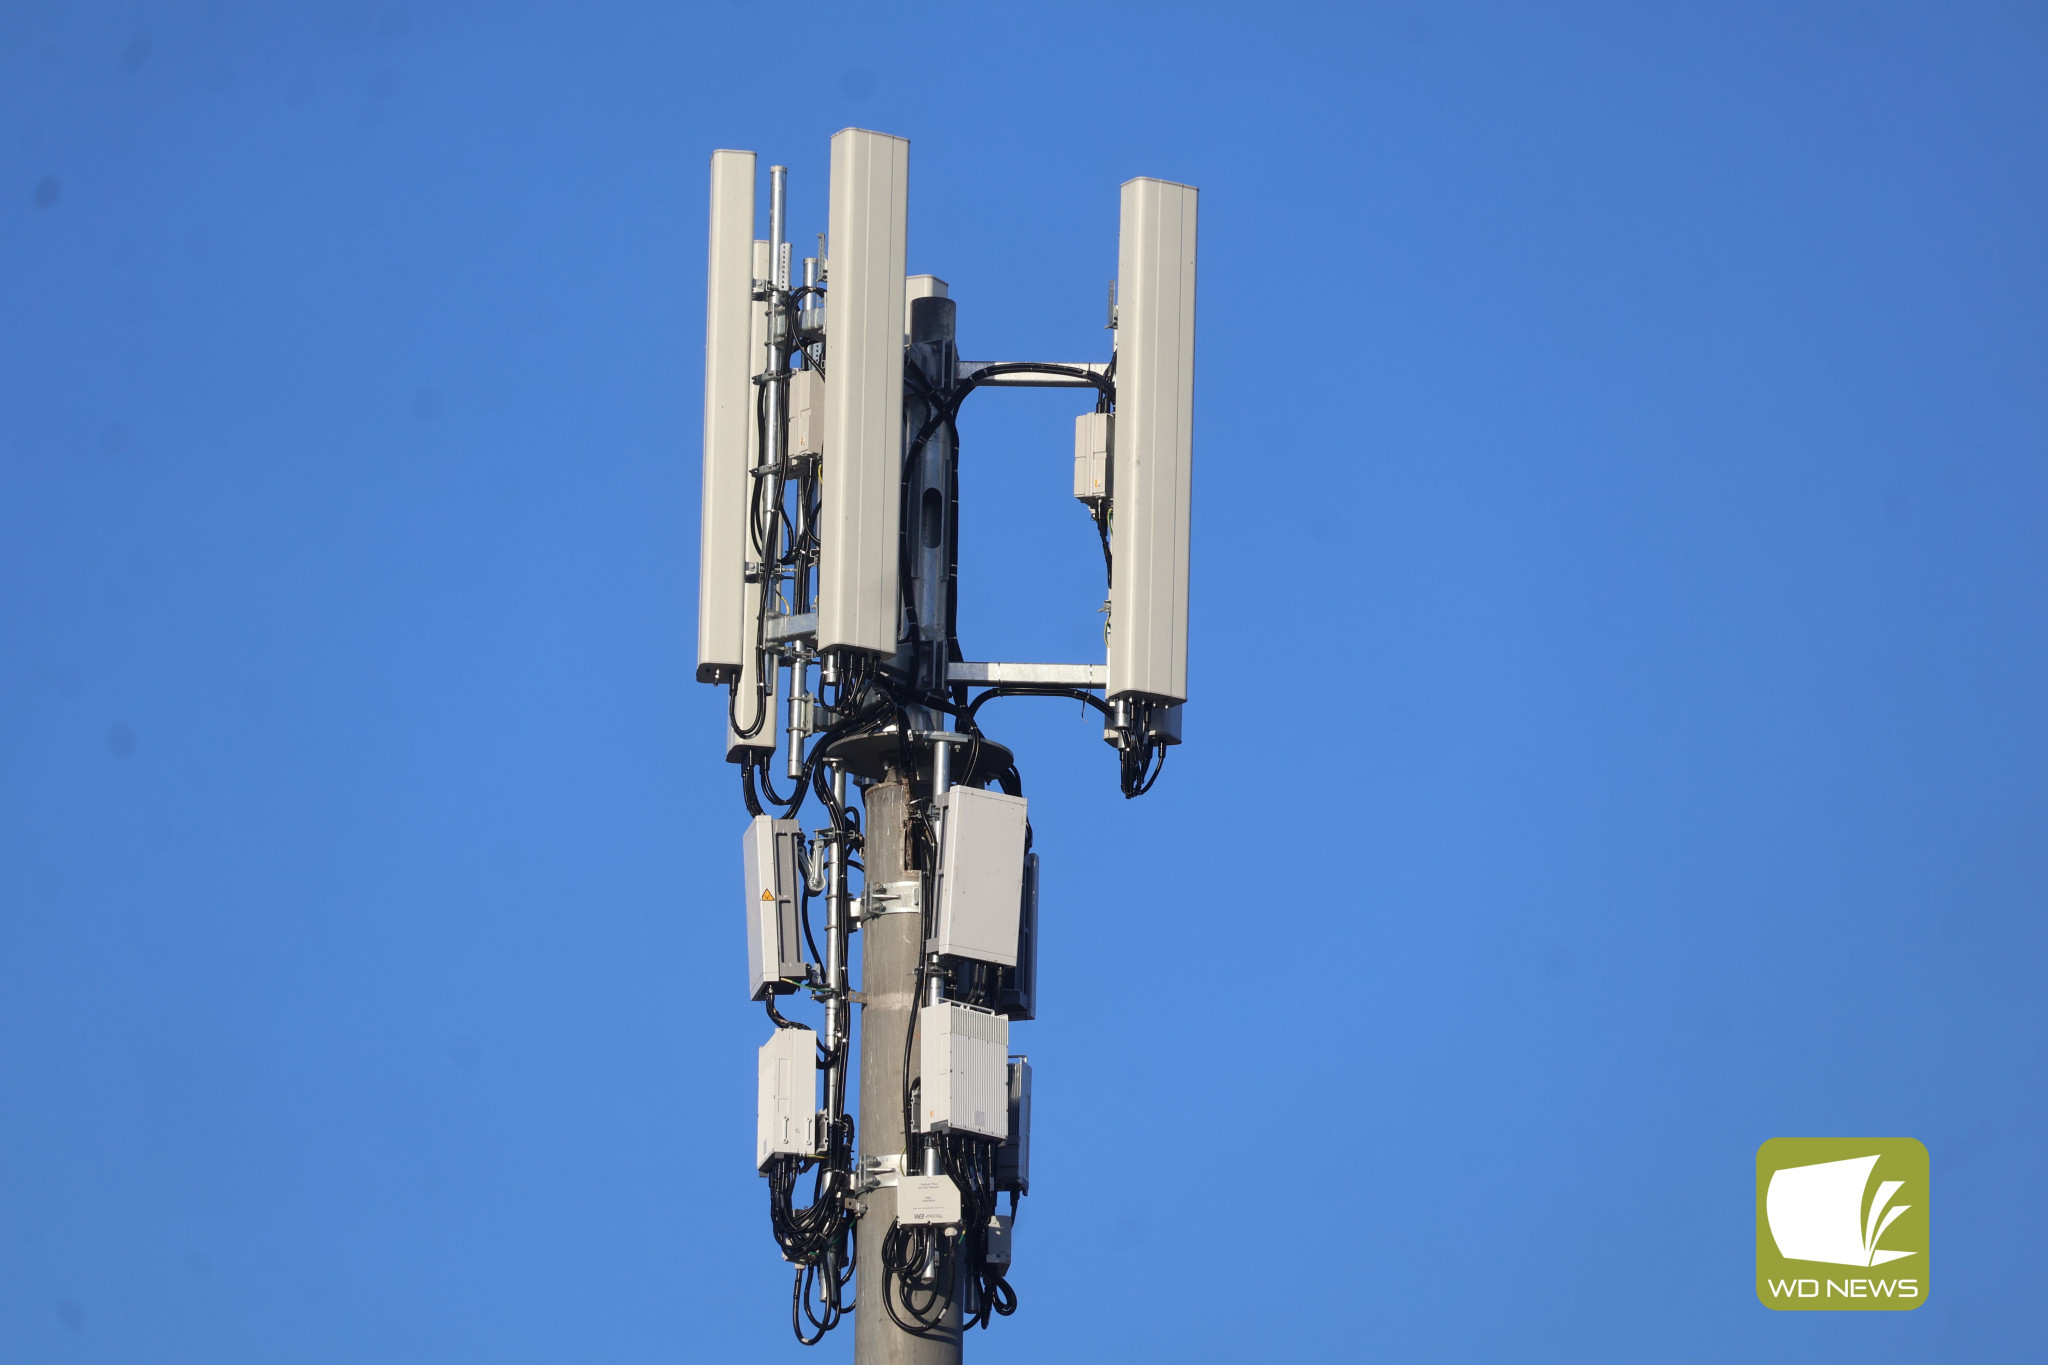 Calls to drop: Upgrades to Telstra’s mobile base station this week are expected to result in some temporary outages to service.